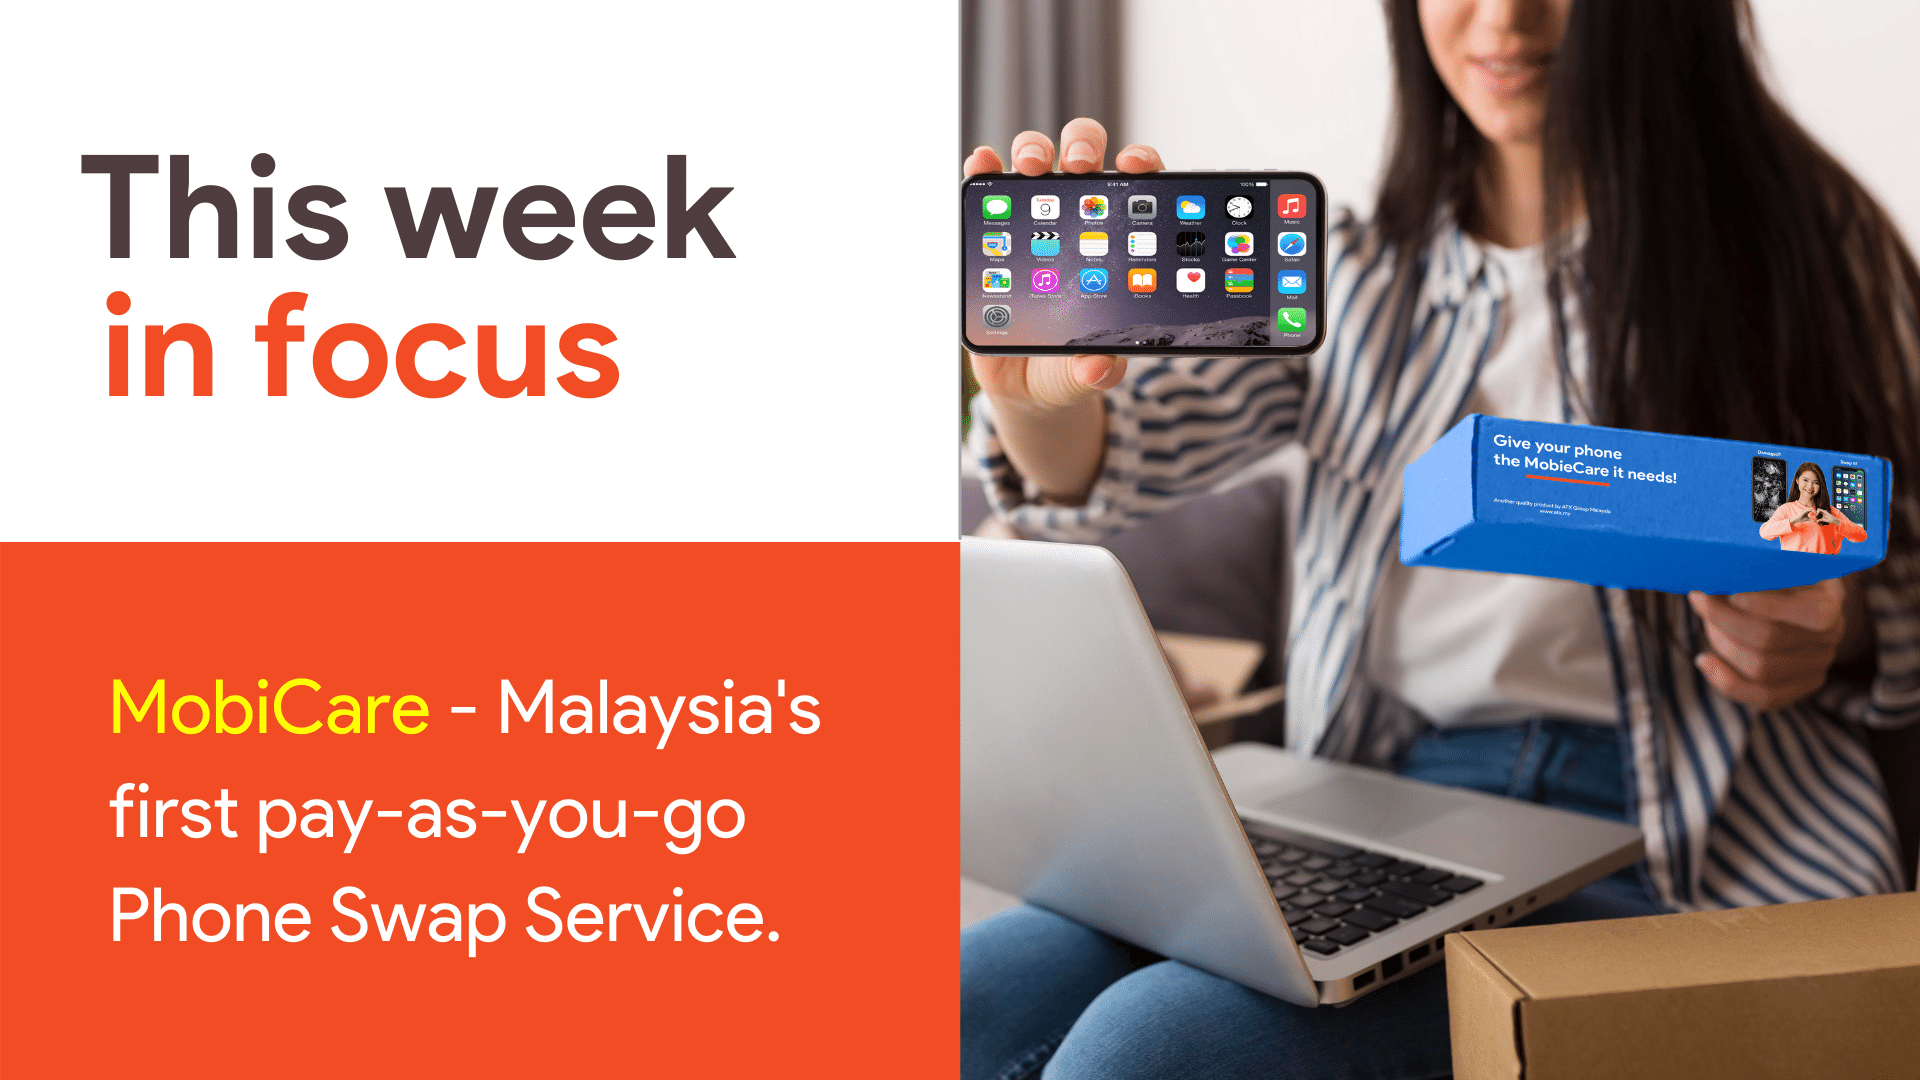 MobiCare - Malaysia's first pay as you go phone swap service.